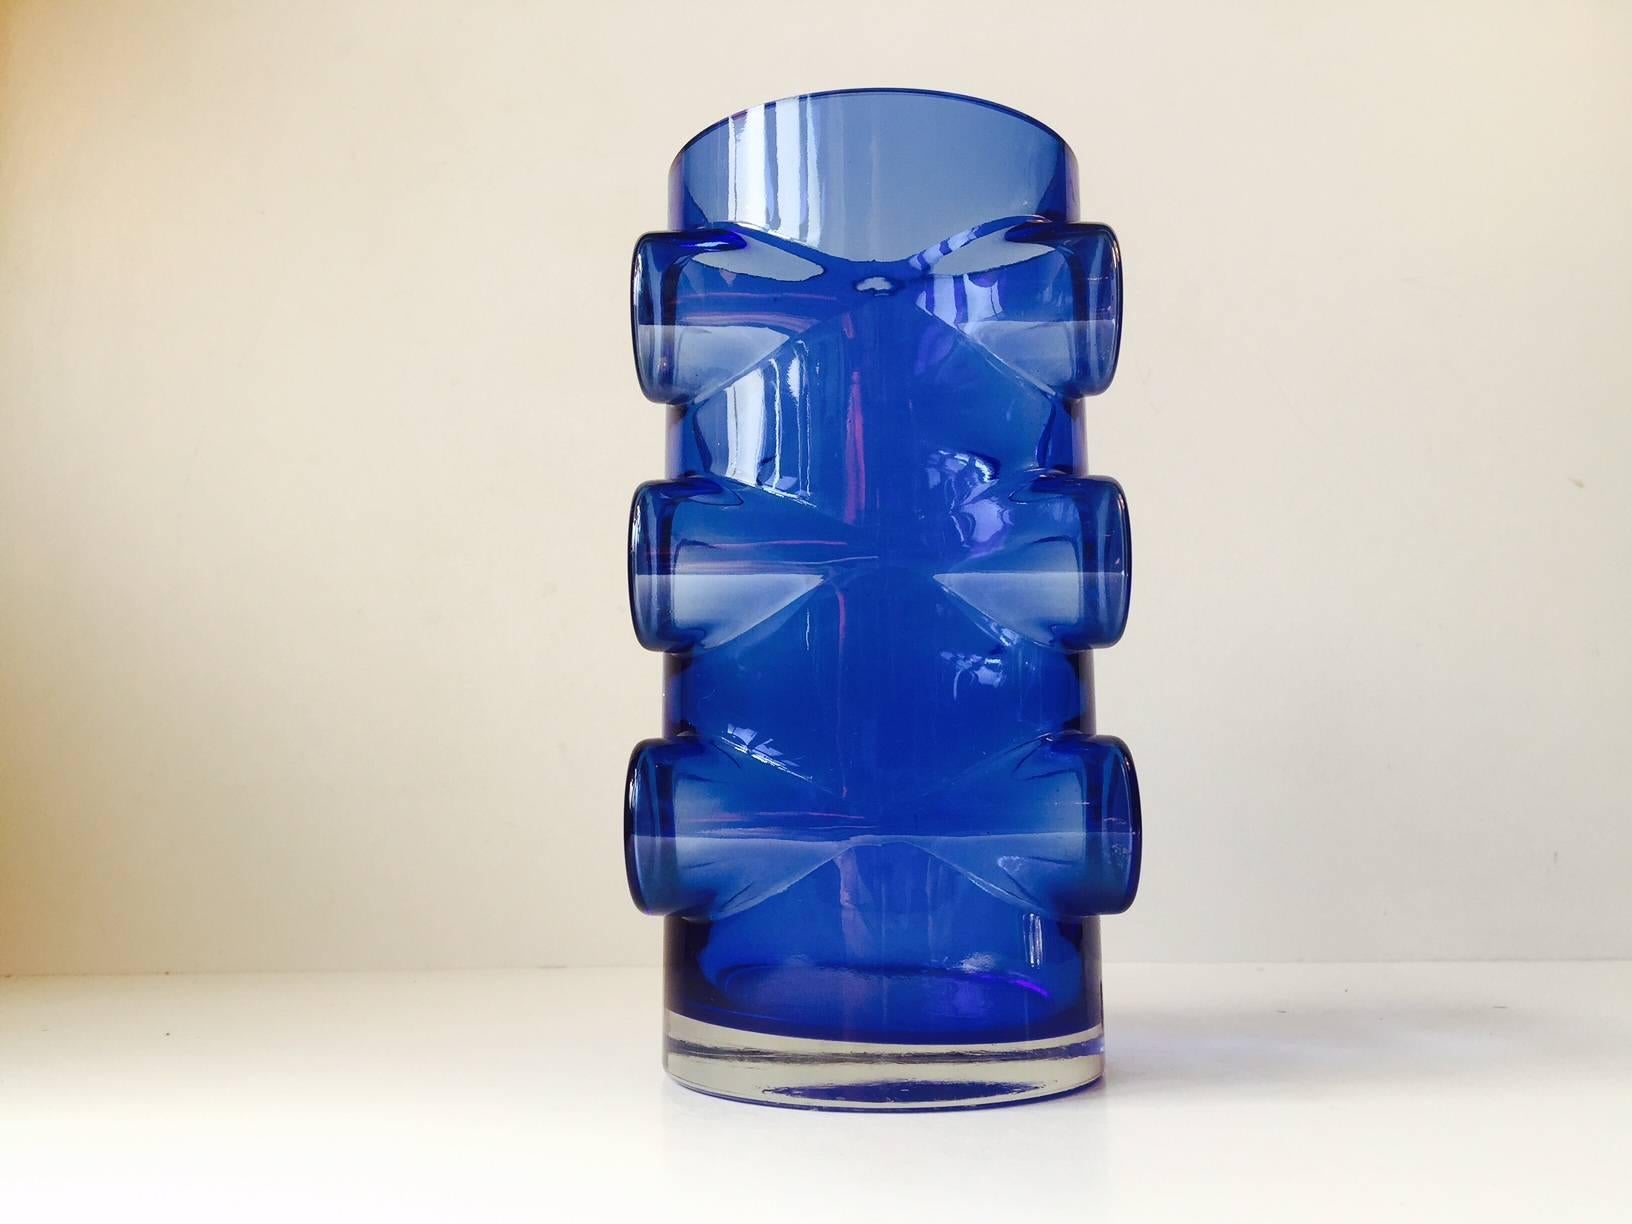 This modernist blue glass vase named 'Pablo' was designed in 1976 by Erkkitapio Siiroinen and manufactured by Riihimäen Lasi Oy in Finland. Mint condition.